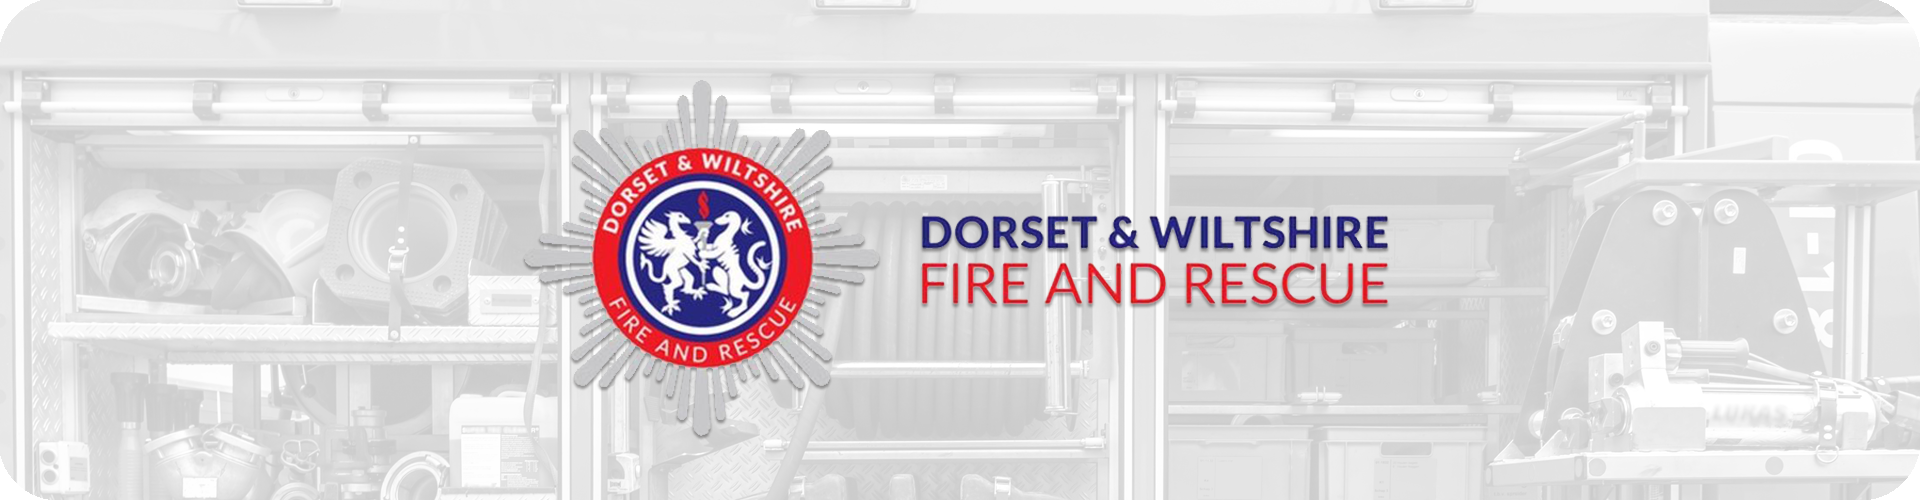 dorset and wiltshire fire and rescue banner